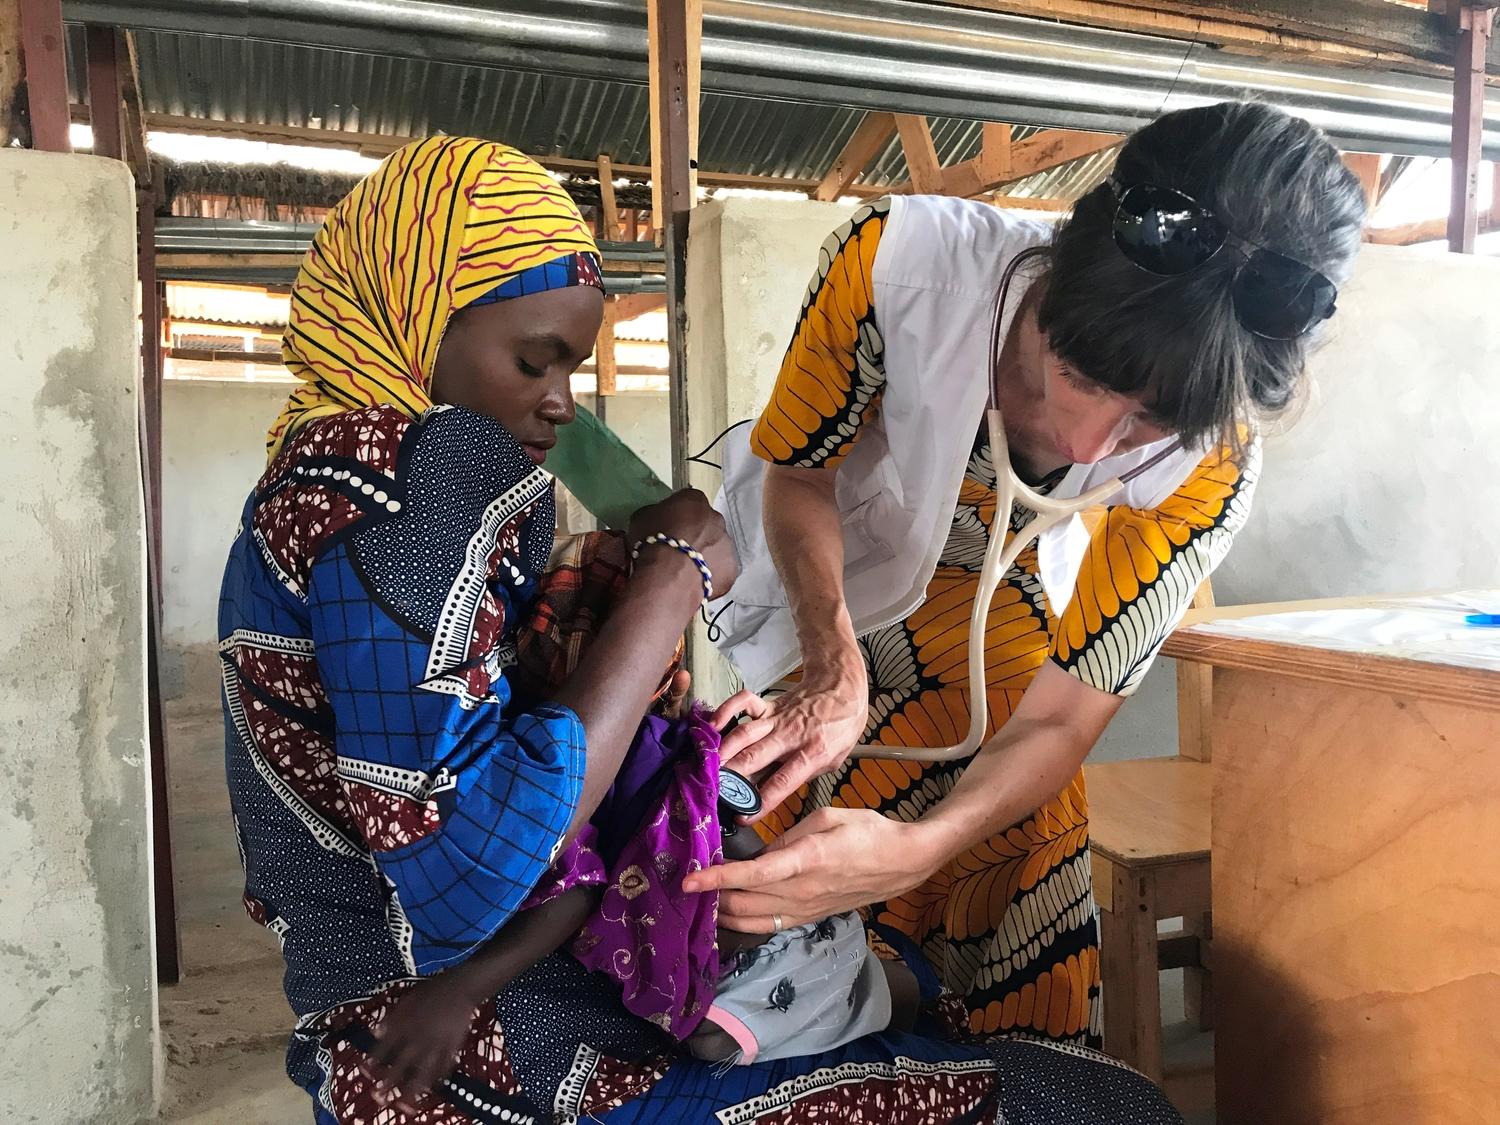 A MSF’s project medical referent in Maradi region, examines a child in Dan Issa health centre. Niger, July 2019. 